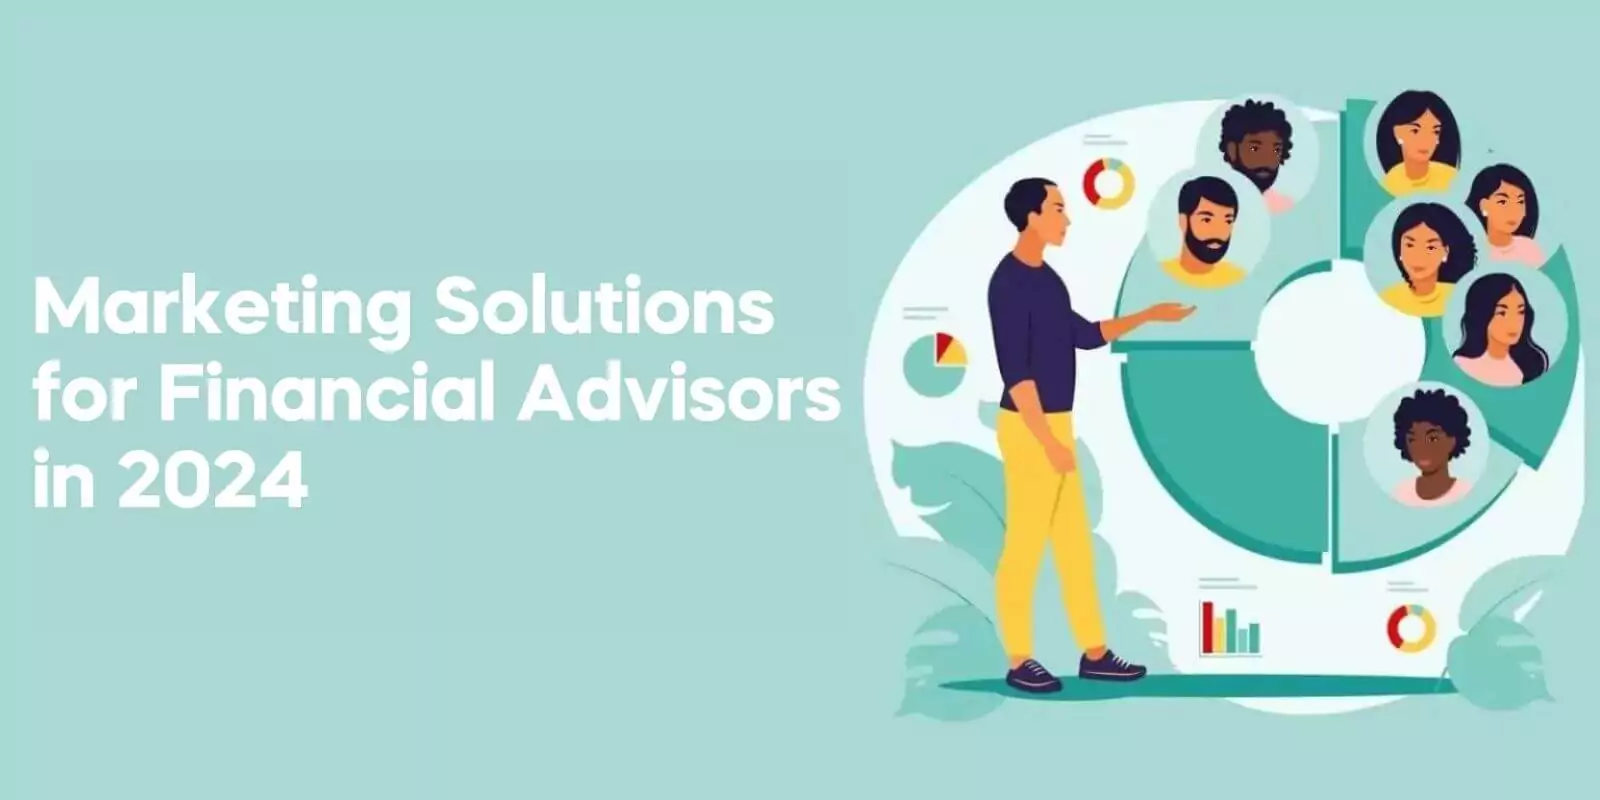 Marketing Solutions for Financial Advisors in 2024